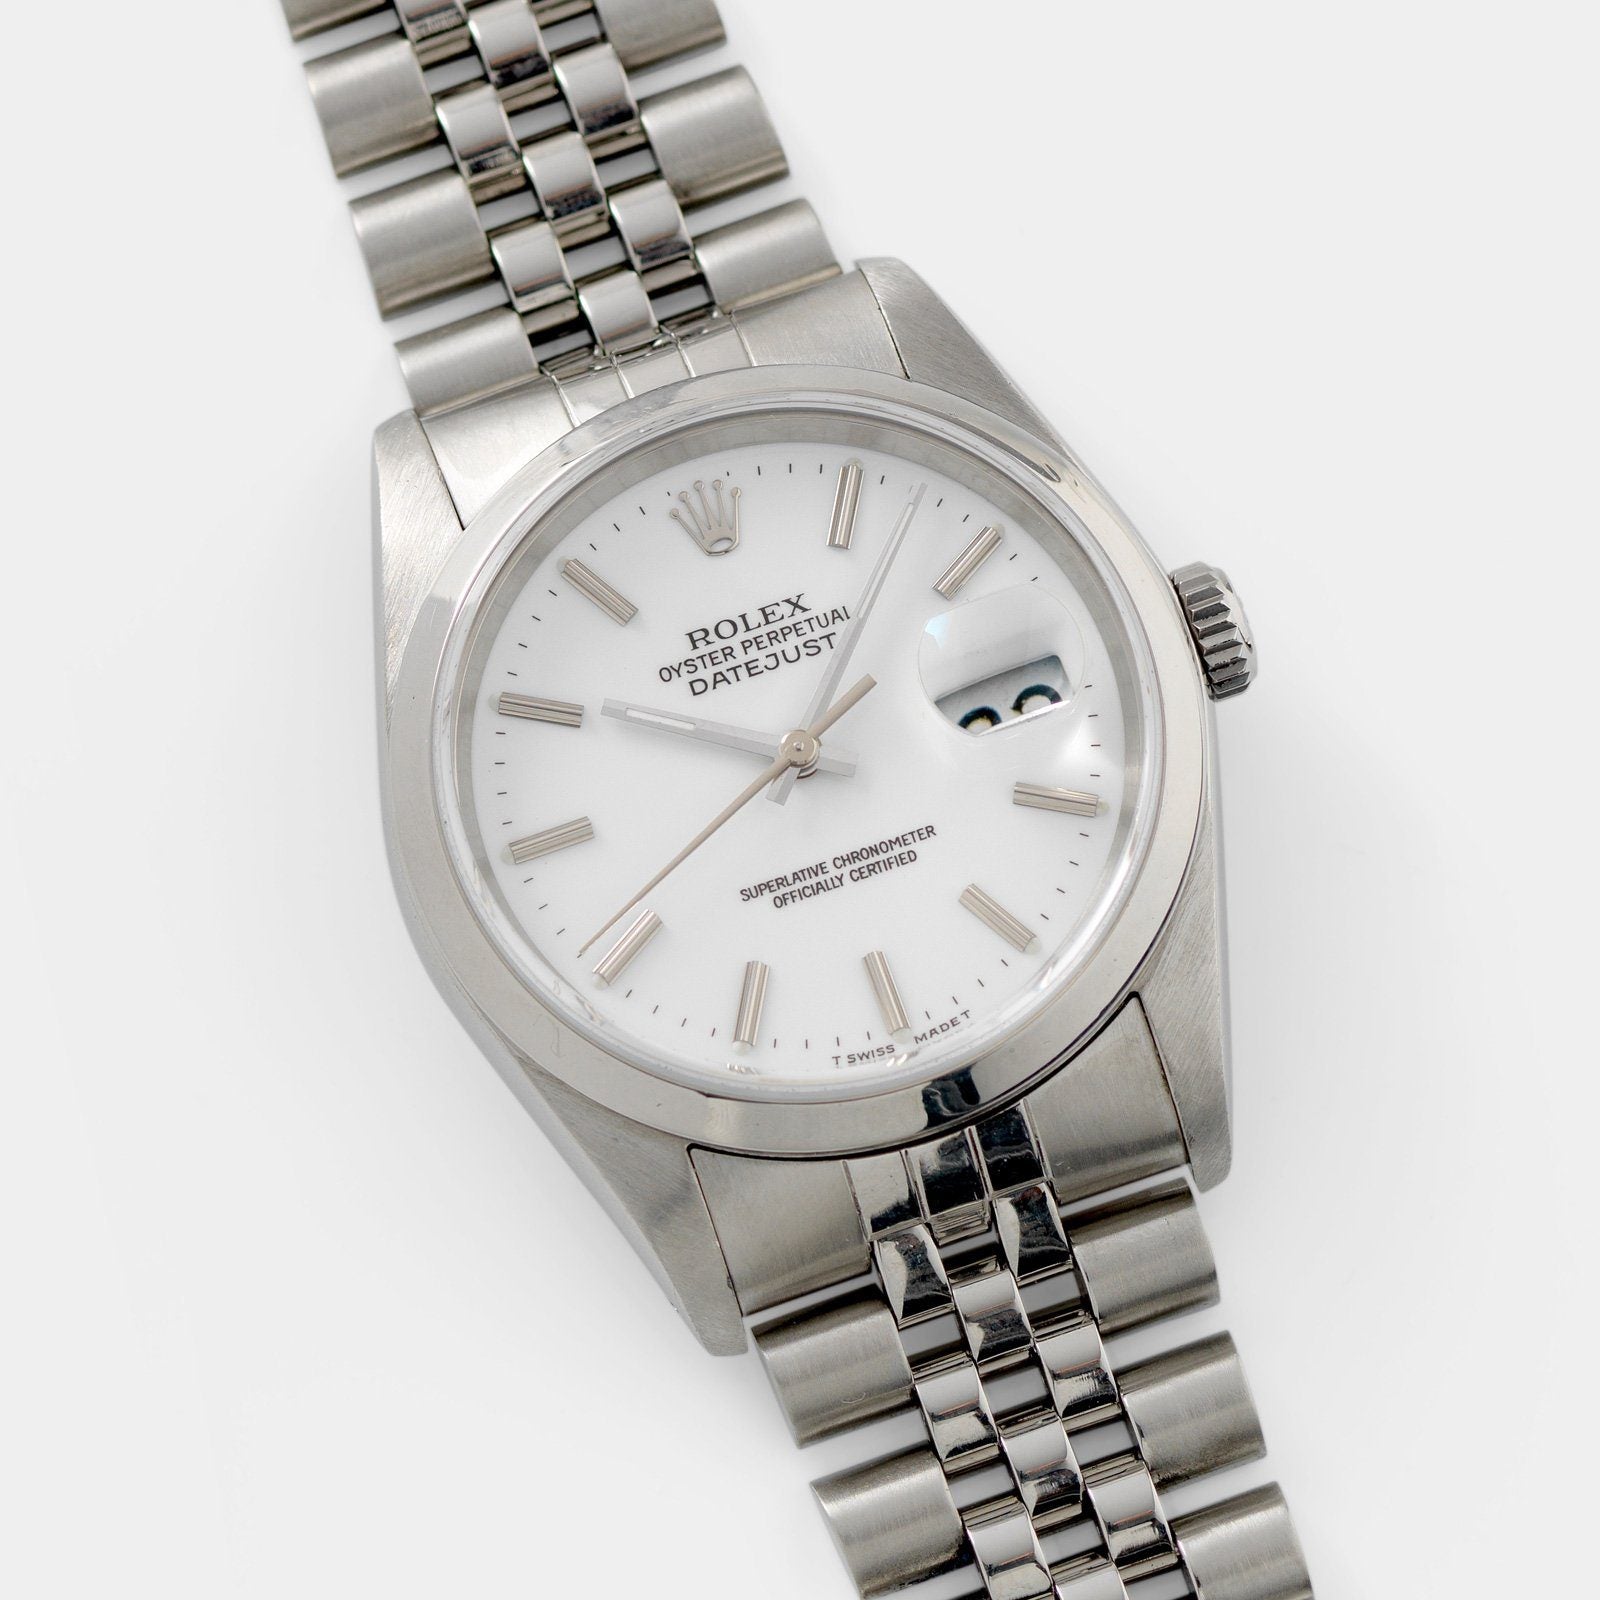 Rolex Datejust White Porcelain Dial Reference 16200 